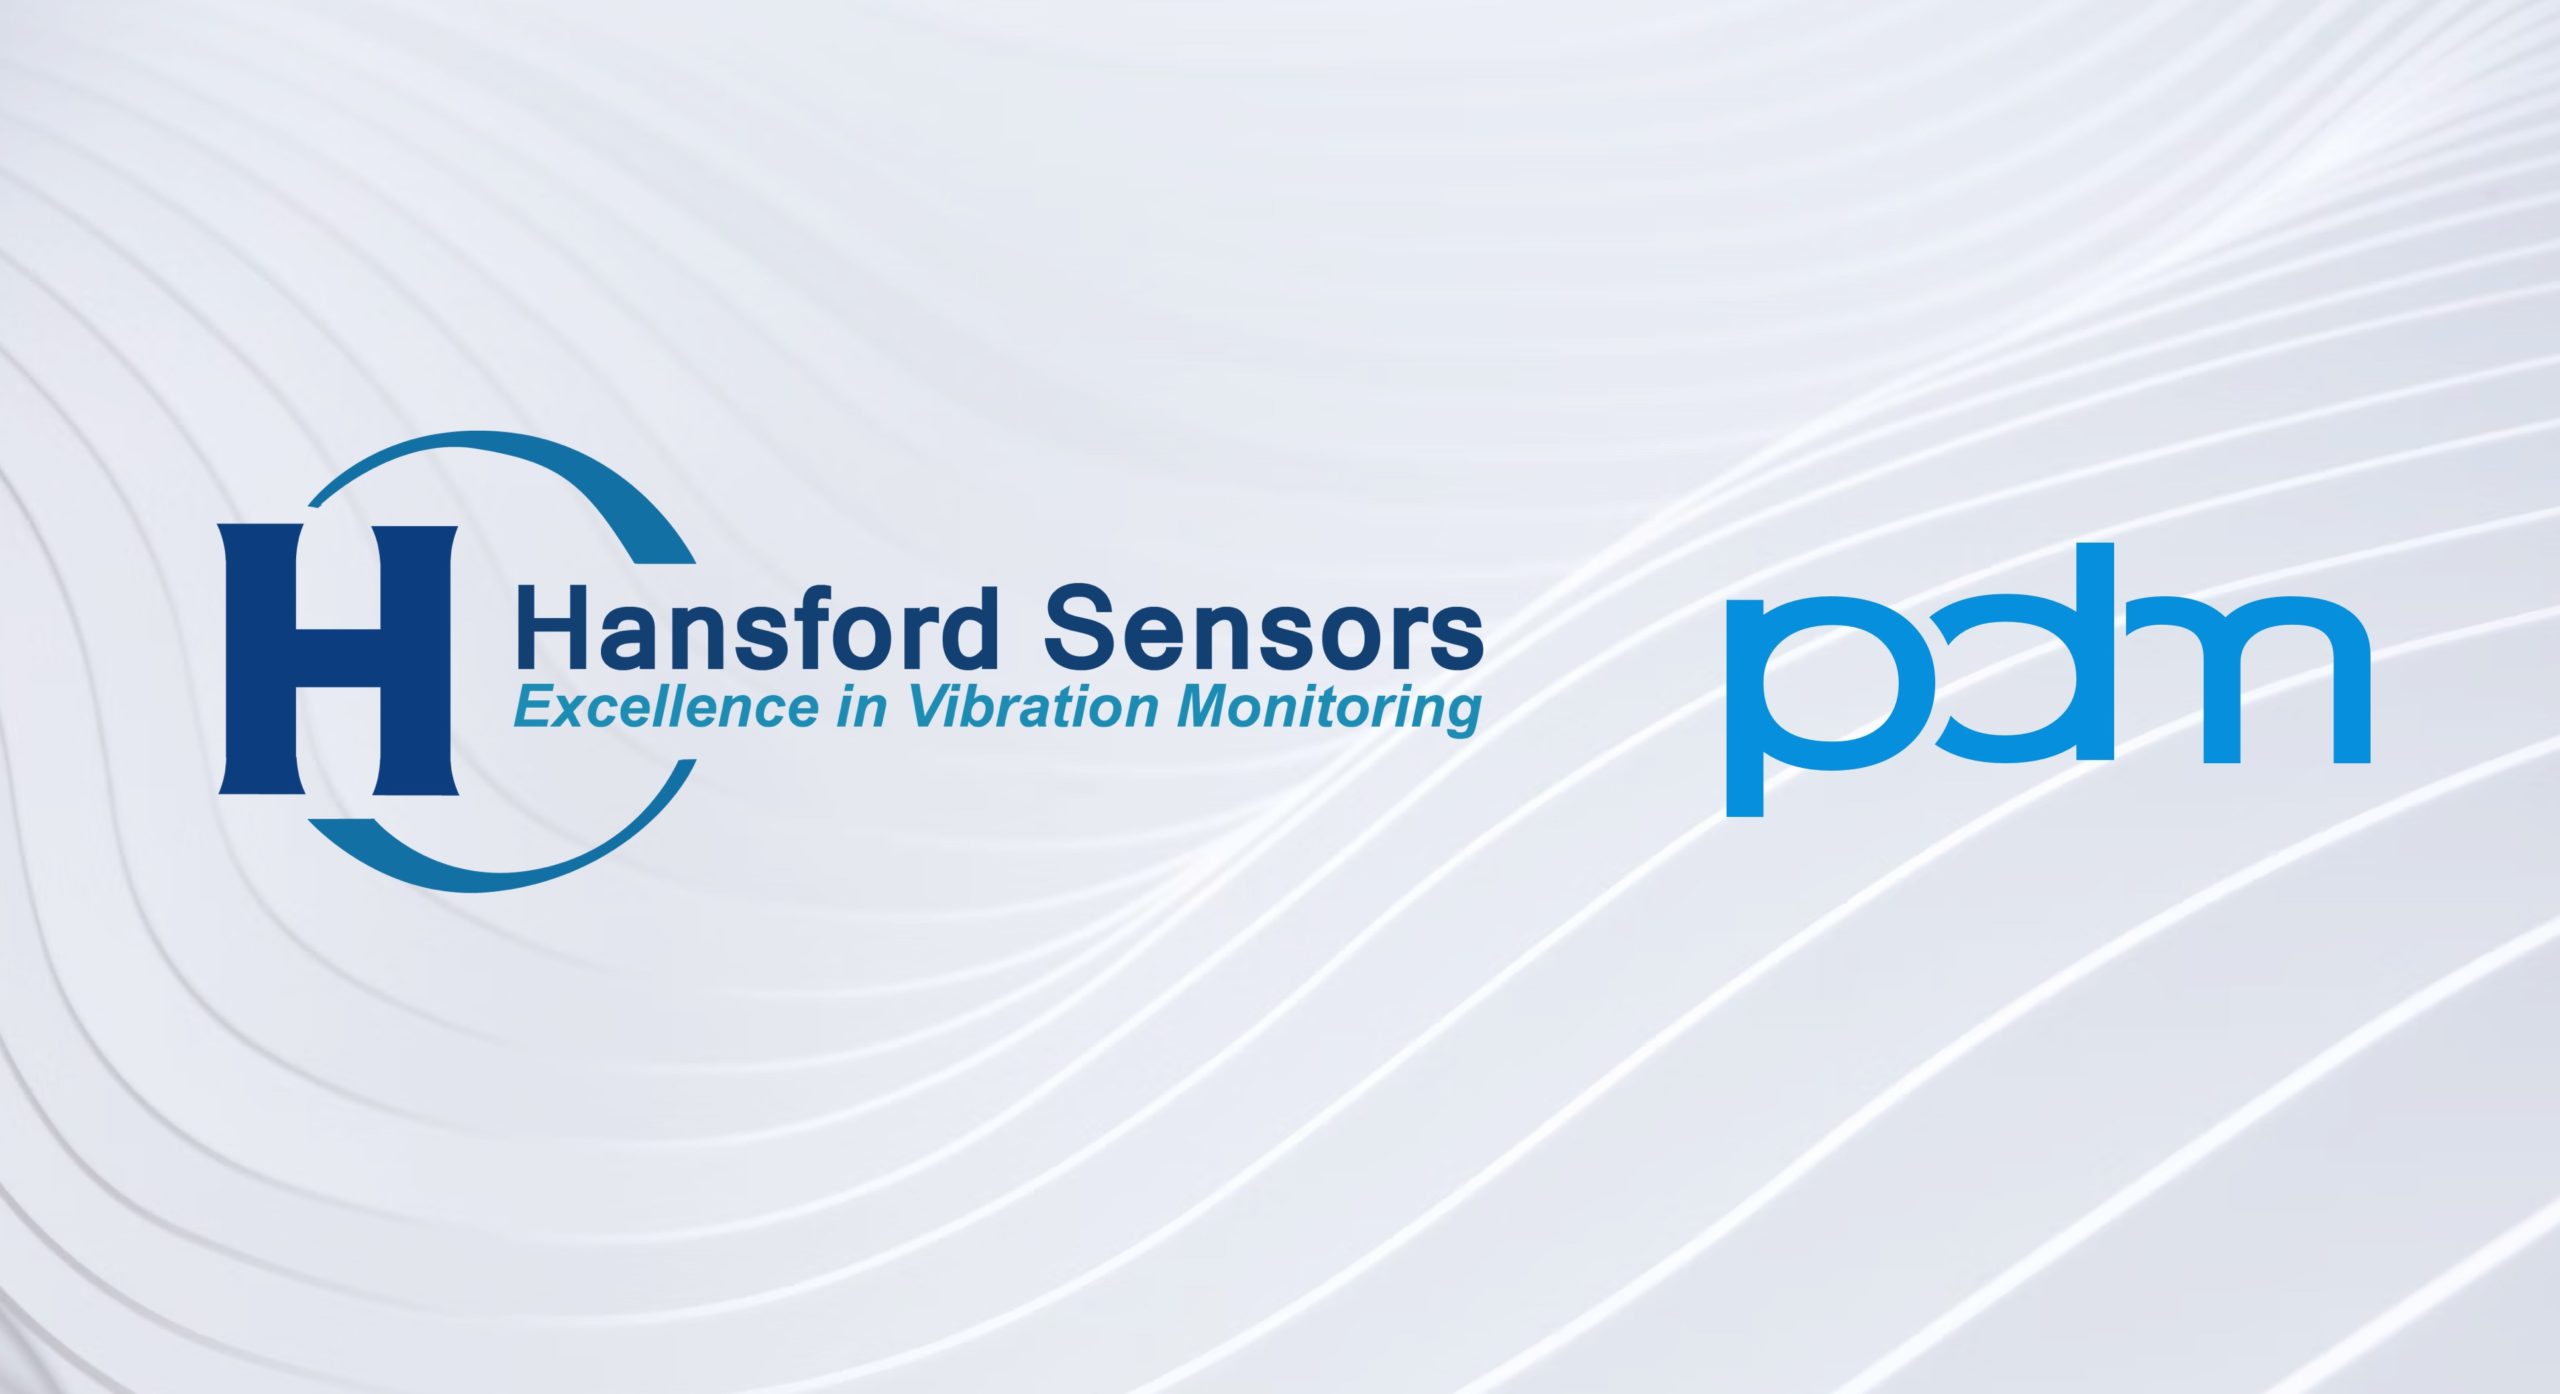 Hansford Sensors logo and PDM Technologies Inc. logo on a textured light background